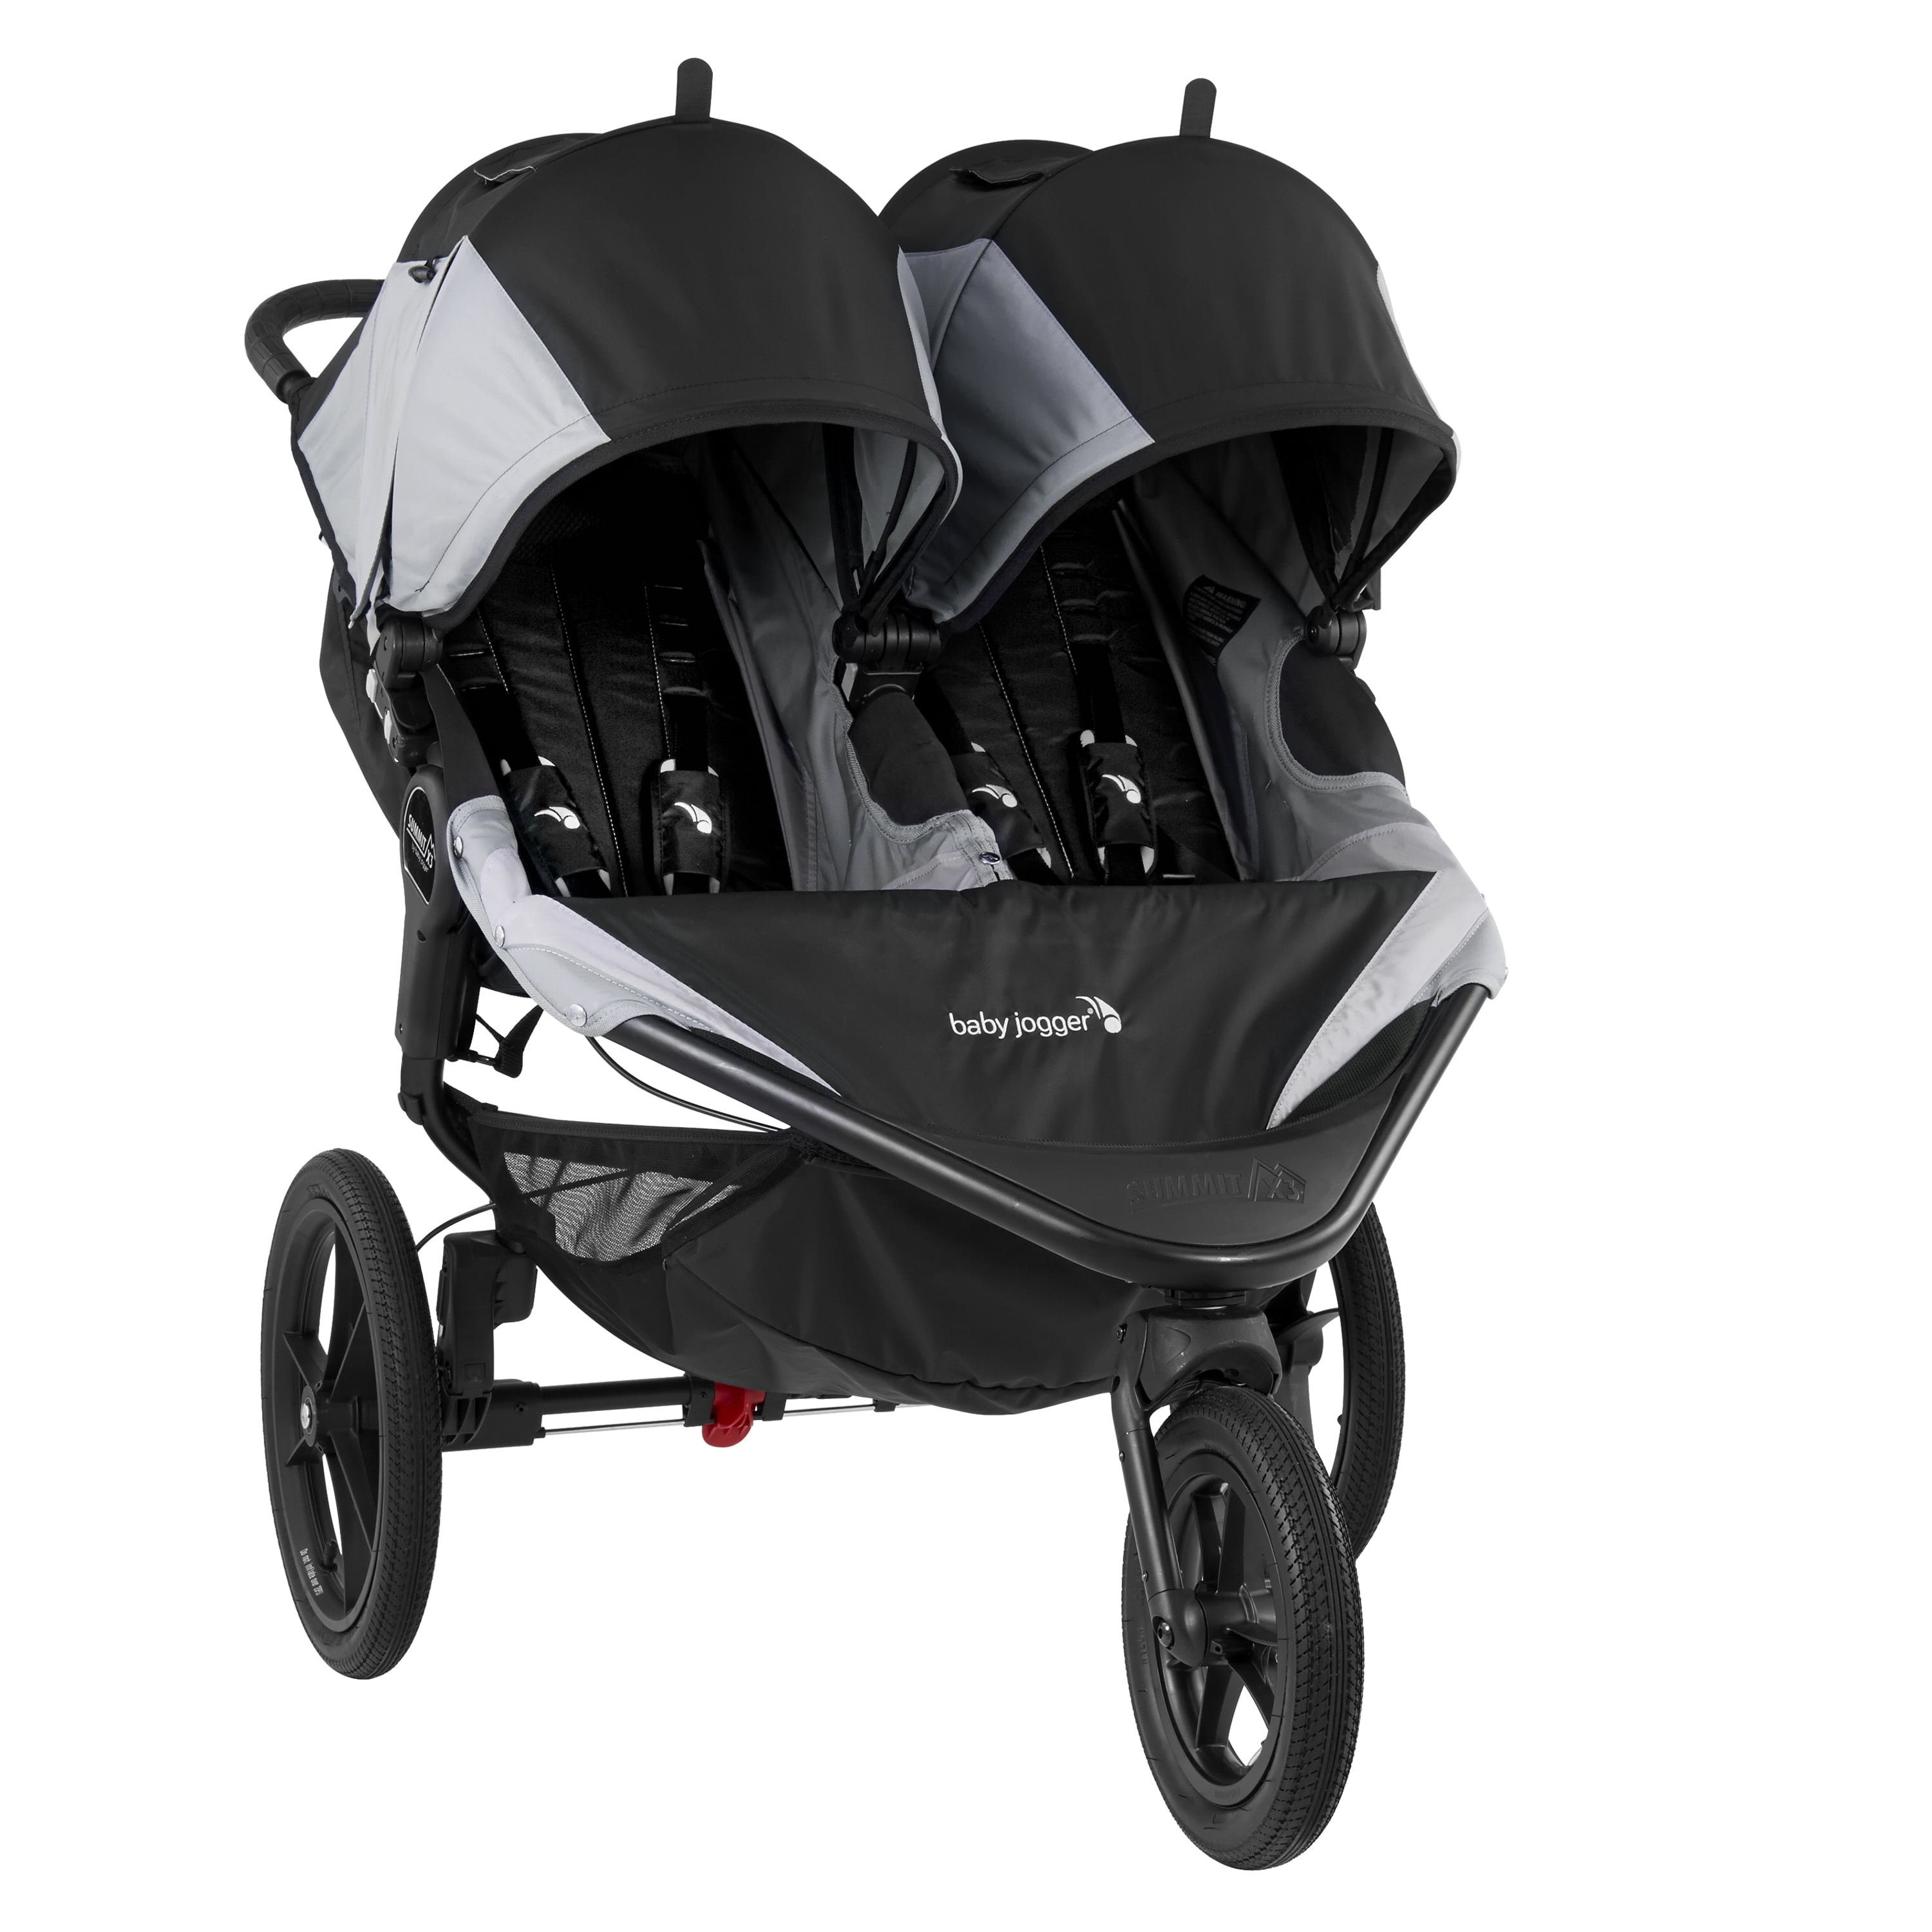 arm ordningen Tryk ned Baby Jogger Summit X3 Double Jogging Stroller, Black and Gray - Walmart.com